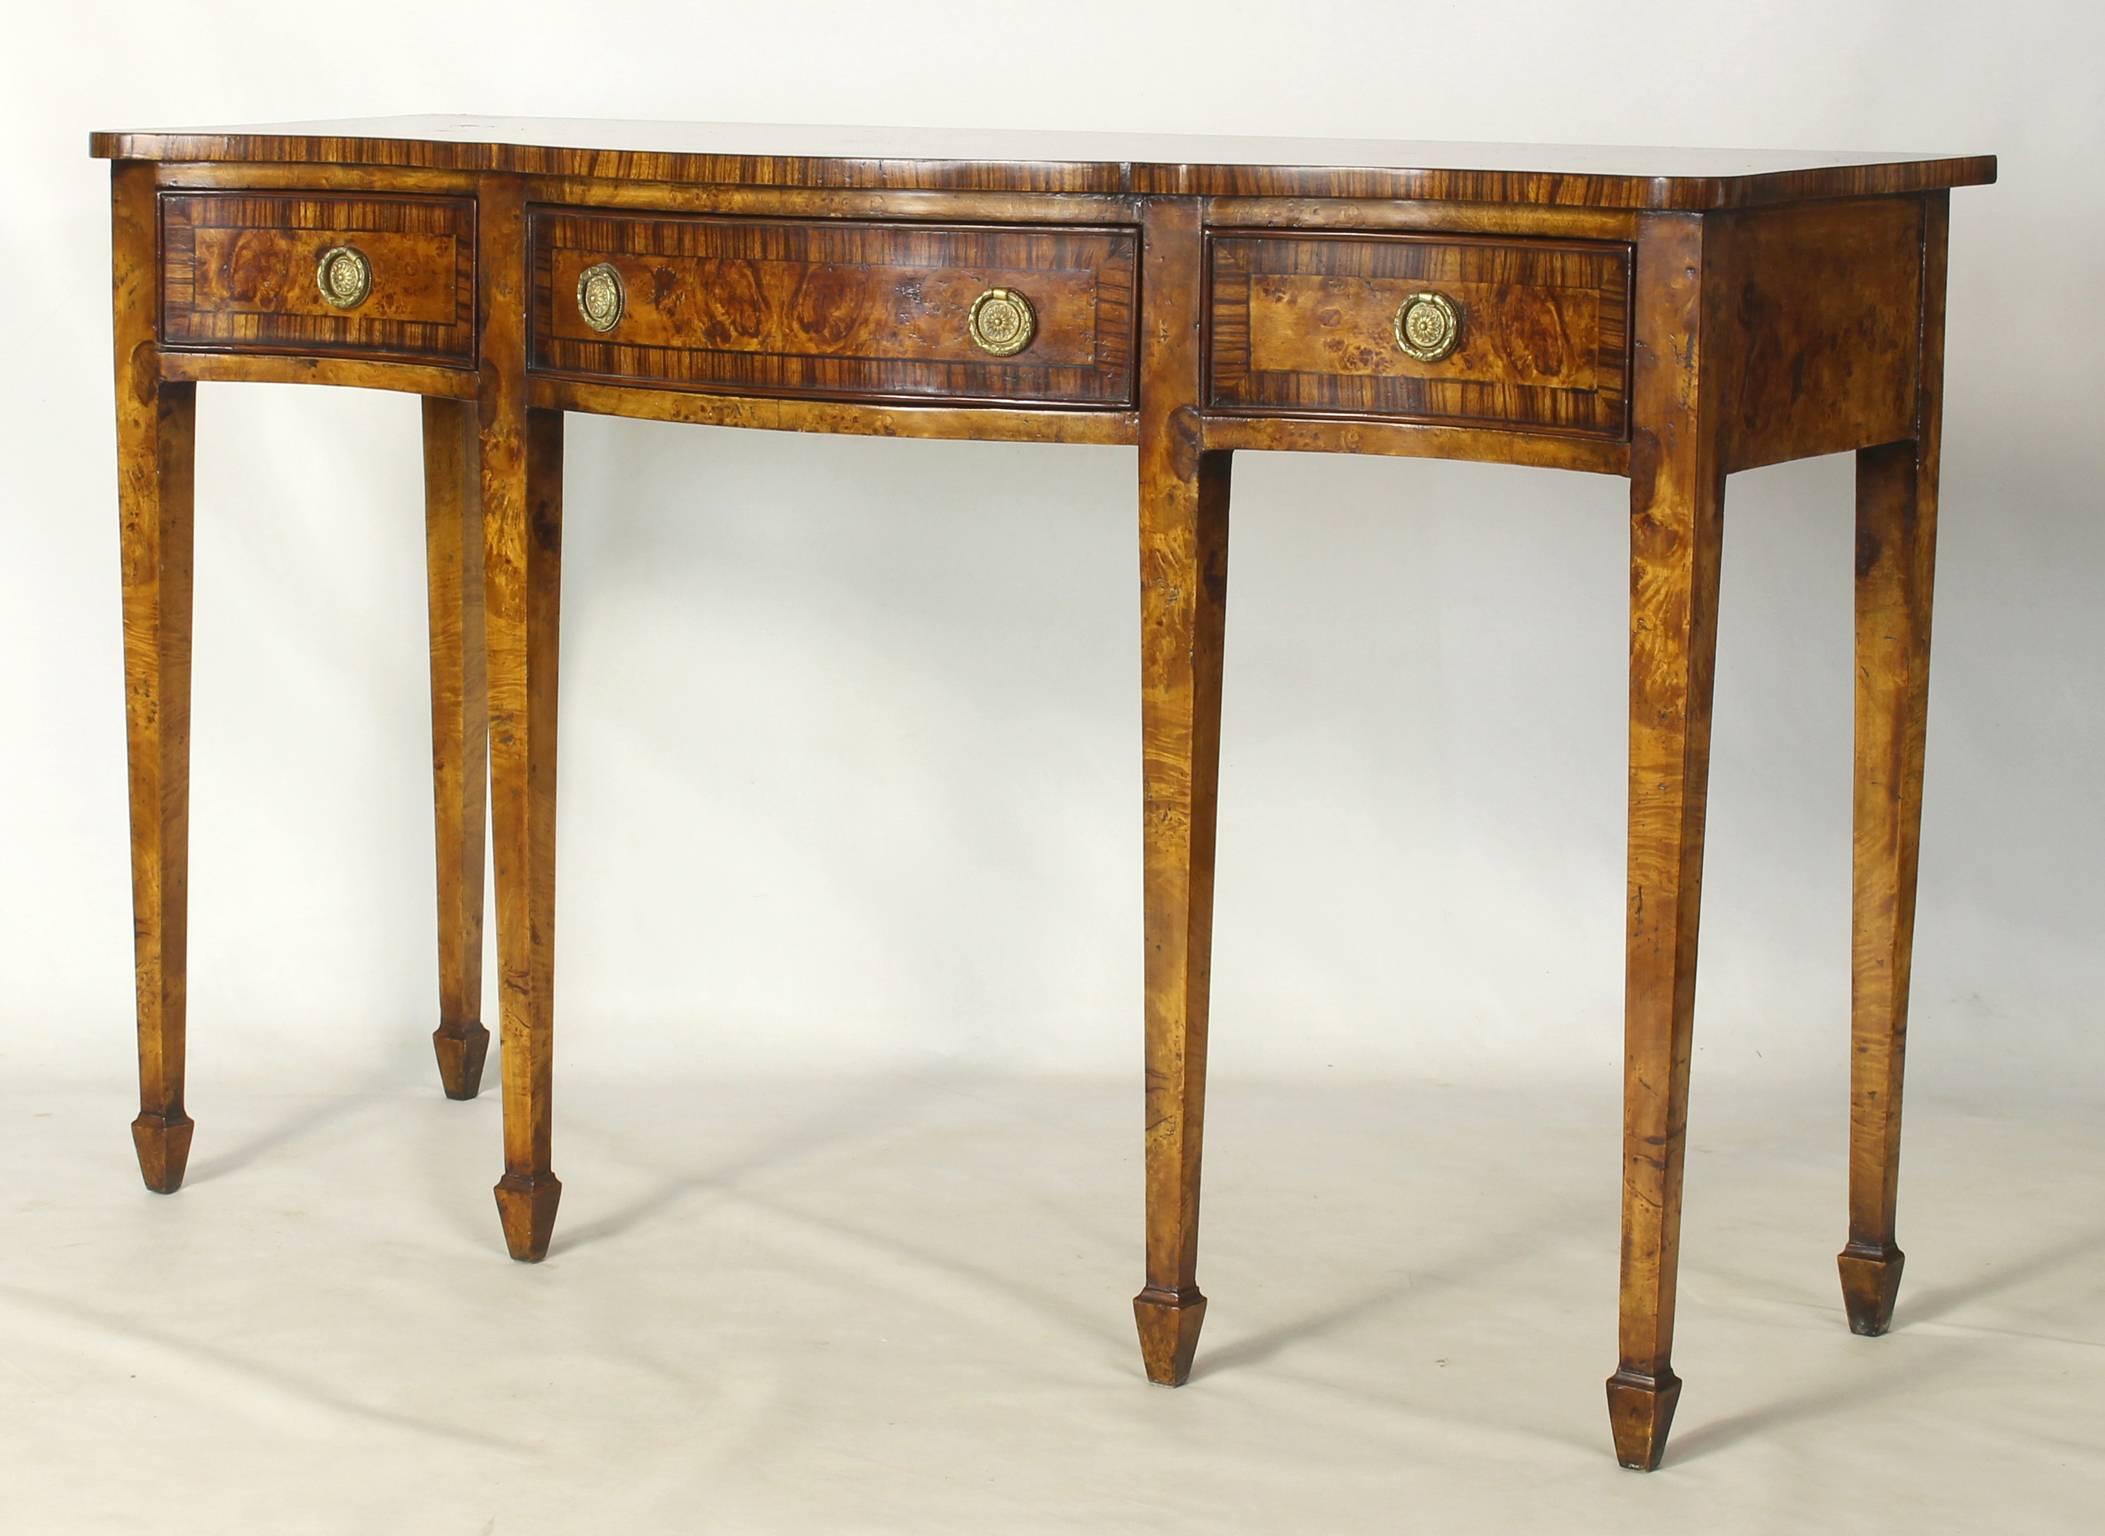 An elegant burle walnut and rosewood serpentine front three-drawer console table with tapering square legs terminating in spade feet.